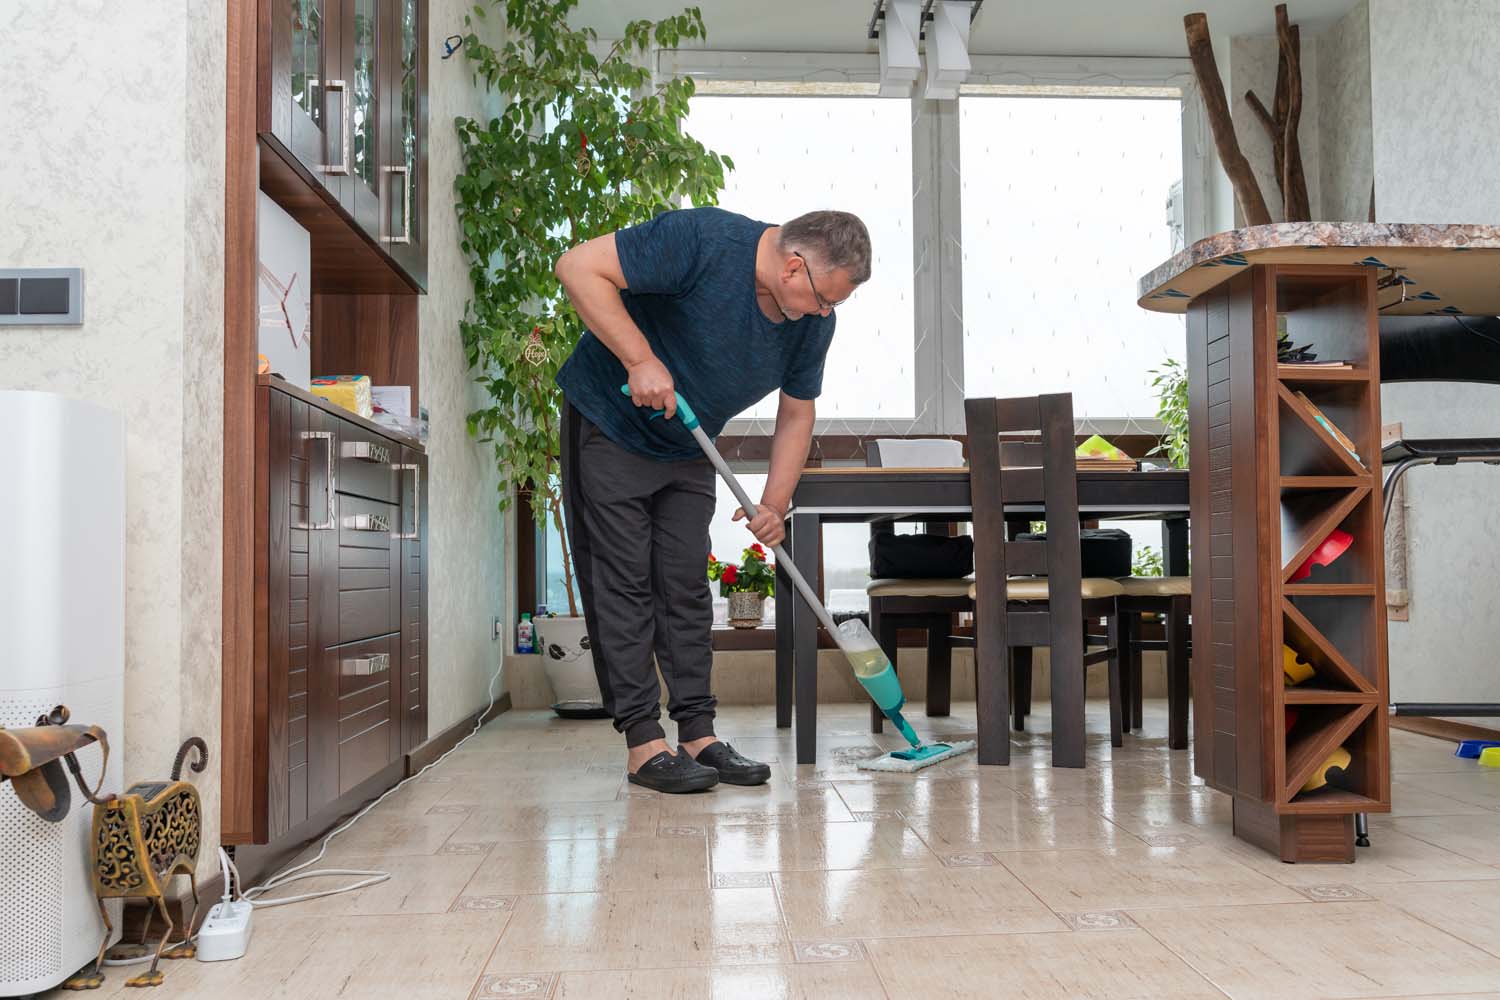 a-man-cleans-the-tiled-floor-in-an-apartment-with